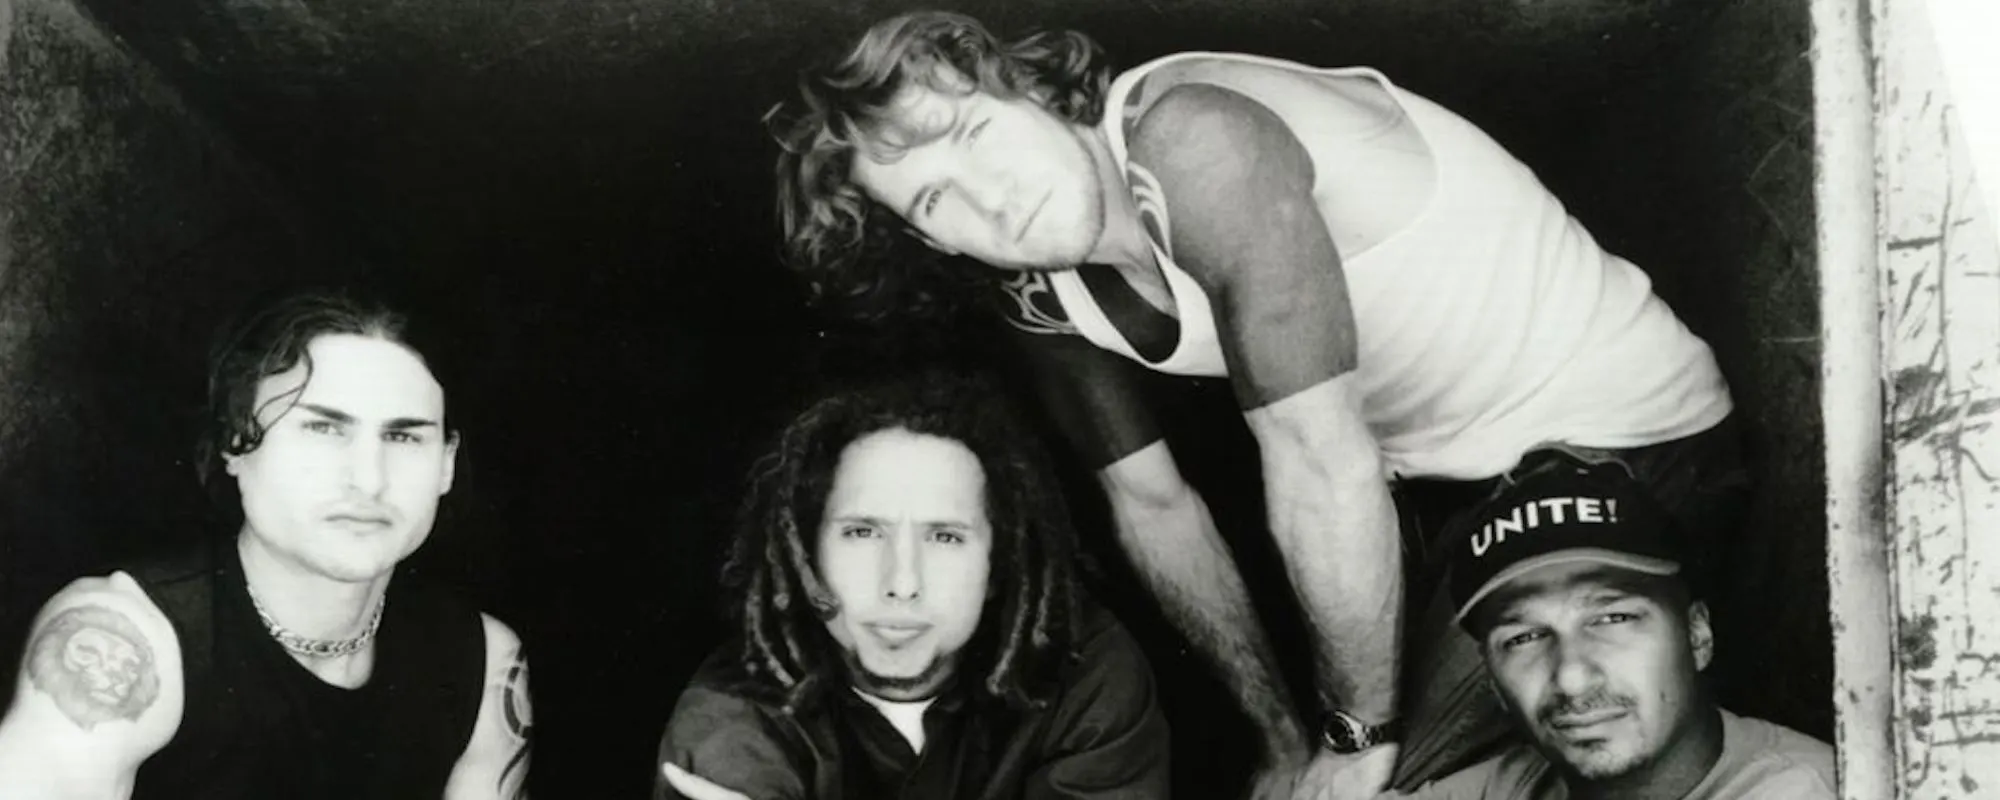 Rage Against the Machine Call Potential Overturn of Roe v. Wade an “Assault on People’s Lives”